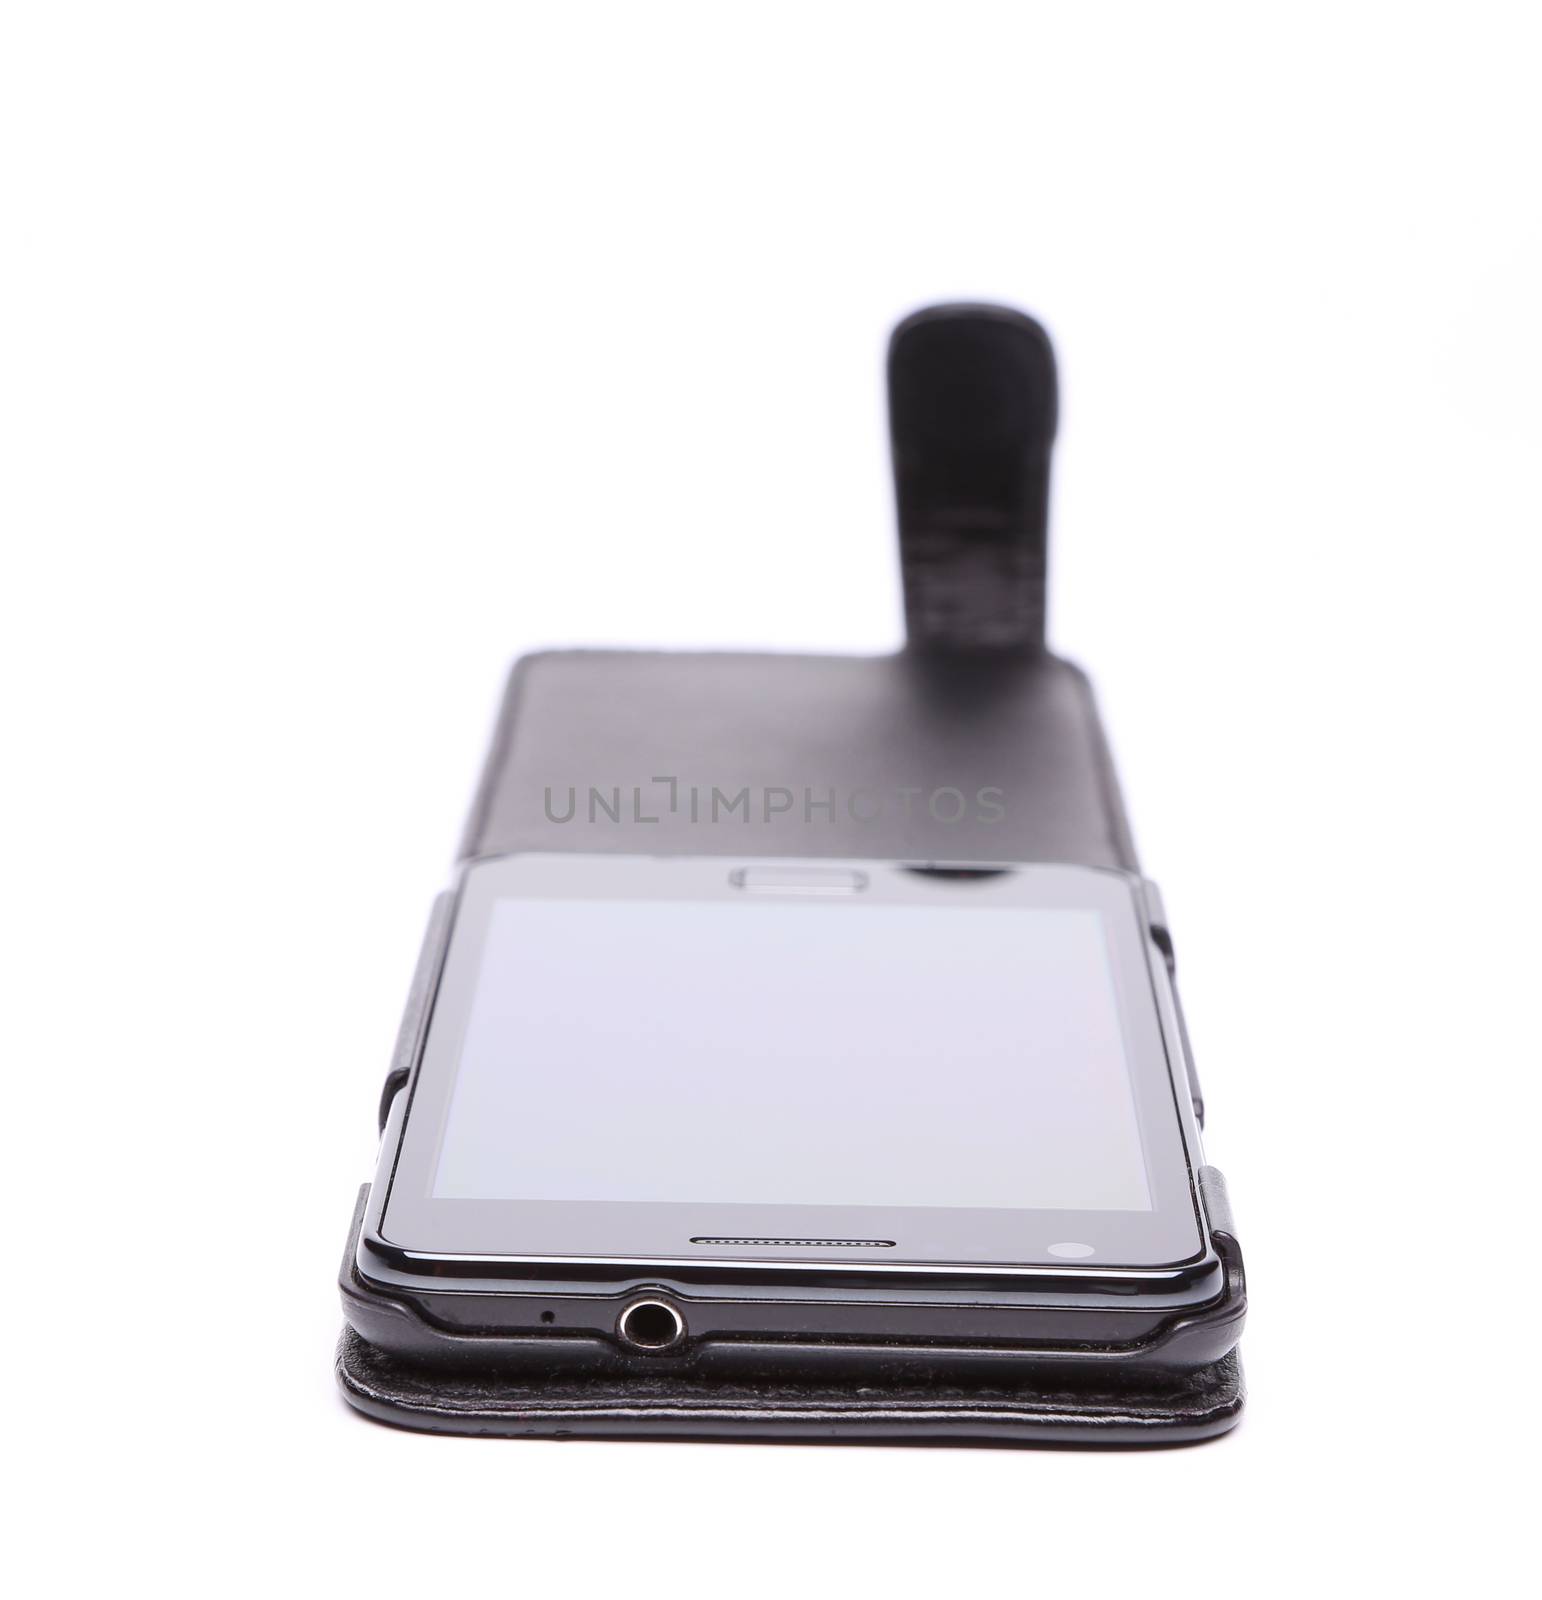 Mobile phone in its case over white background by indigolotos